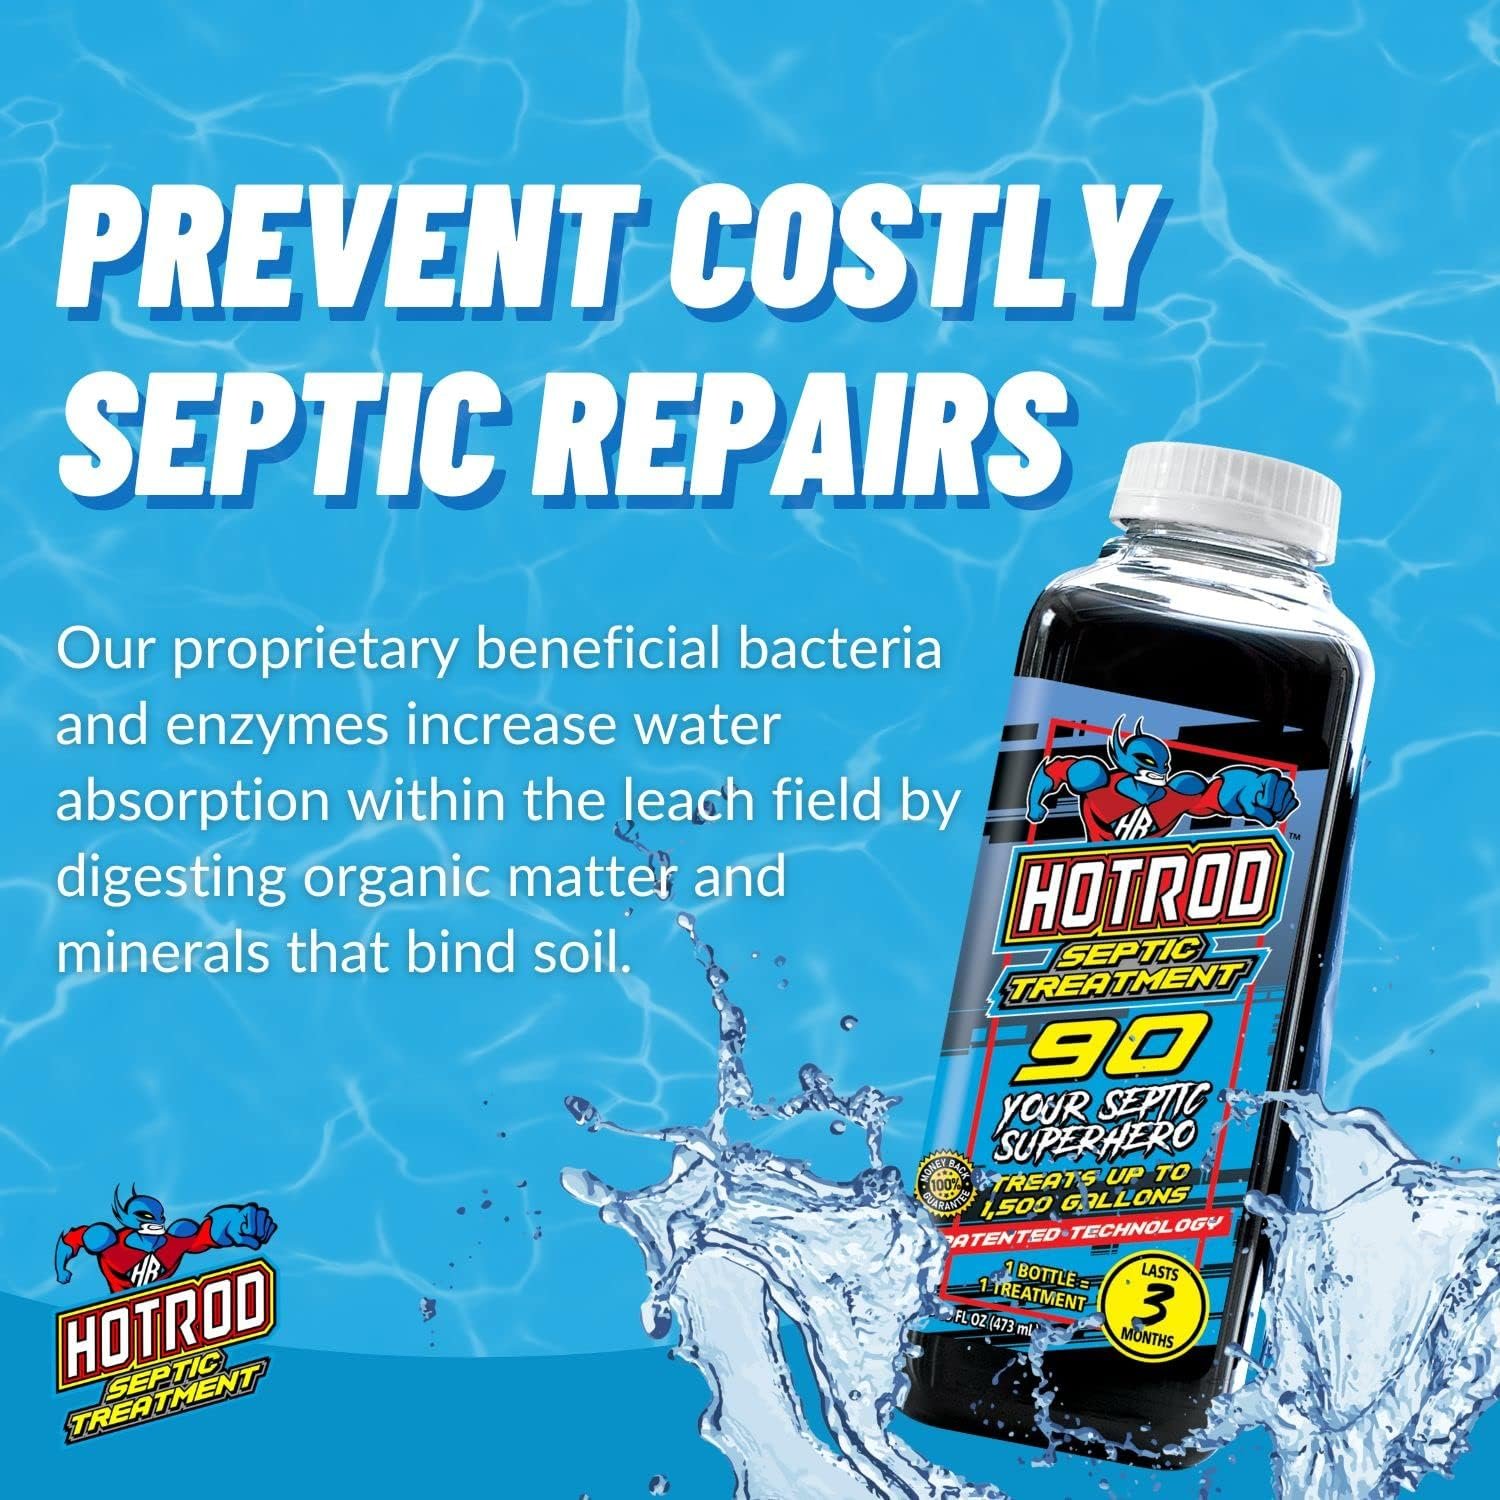 HOTROD Septic Tank Treatment 90-3 Month Supply Extends Septic System Life and Prevents Costly Repairs - Industrial Grade - Easy to Use - Safe on Piping and Plumbing - 16oz Liquid